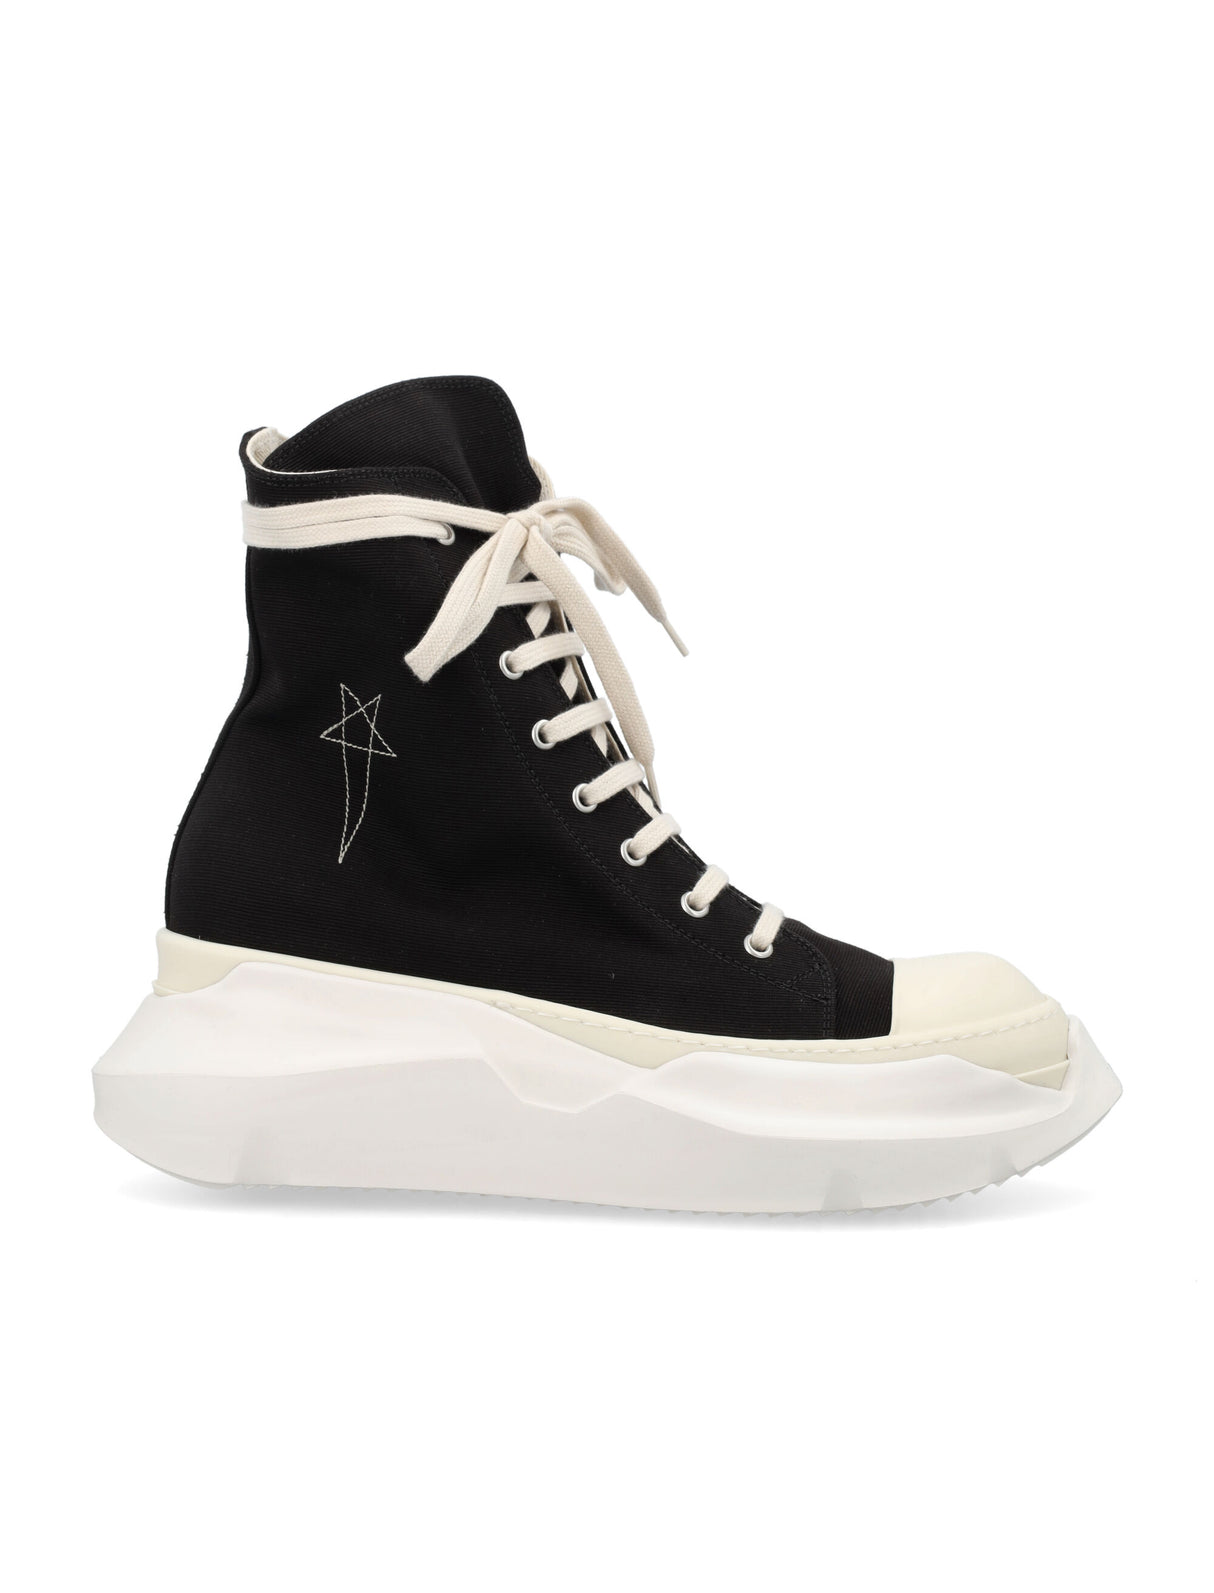 DRKSHDW Women's Abstract Sneak - High Top Sneakers with Side Zip and Embroidered Star